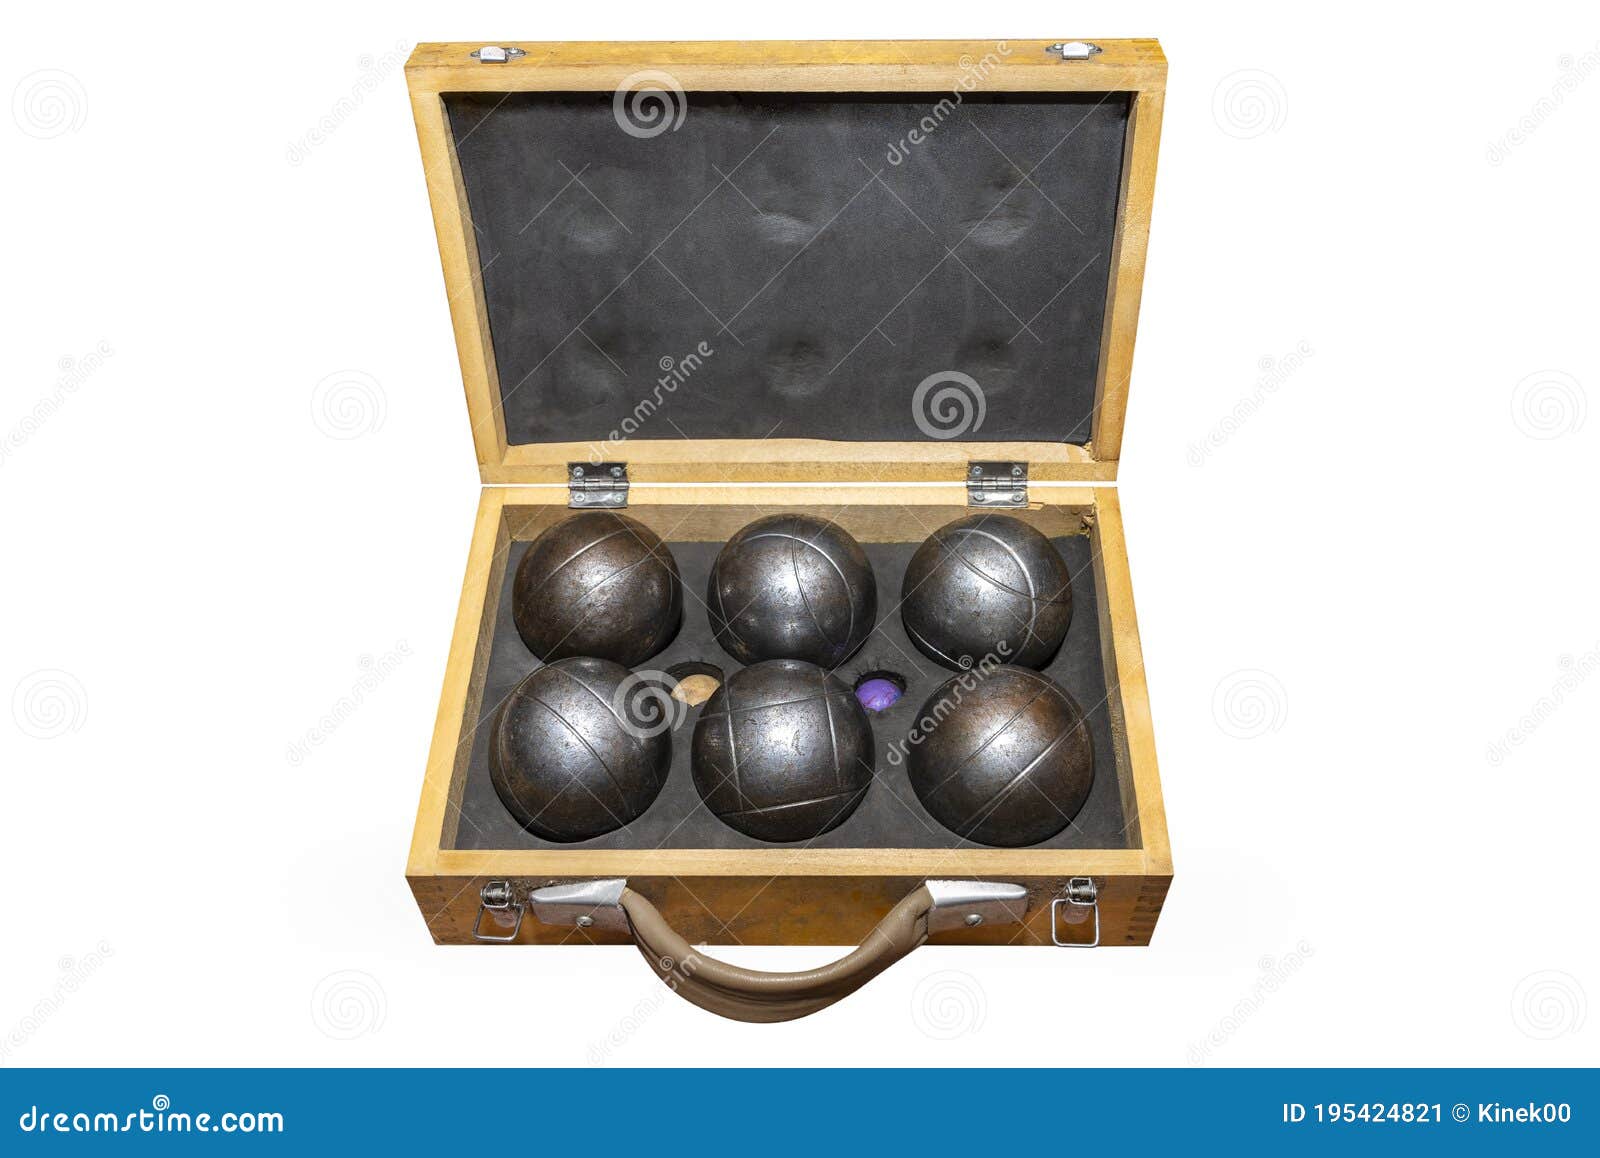 six metal balls placed in a old wooden box, used in game petanka,  on a white background with a clipping path.